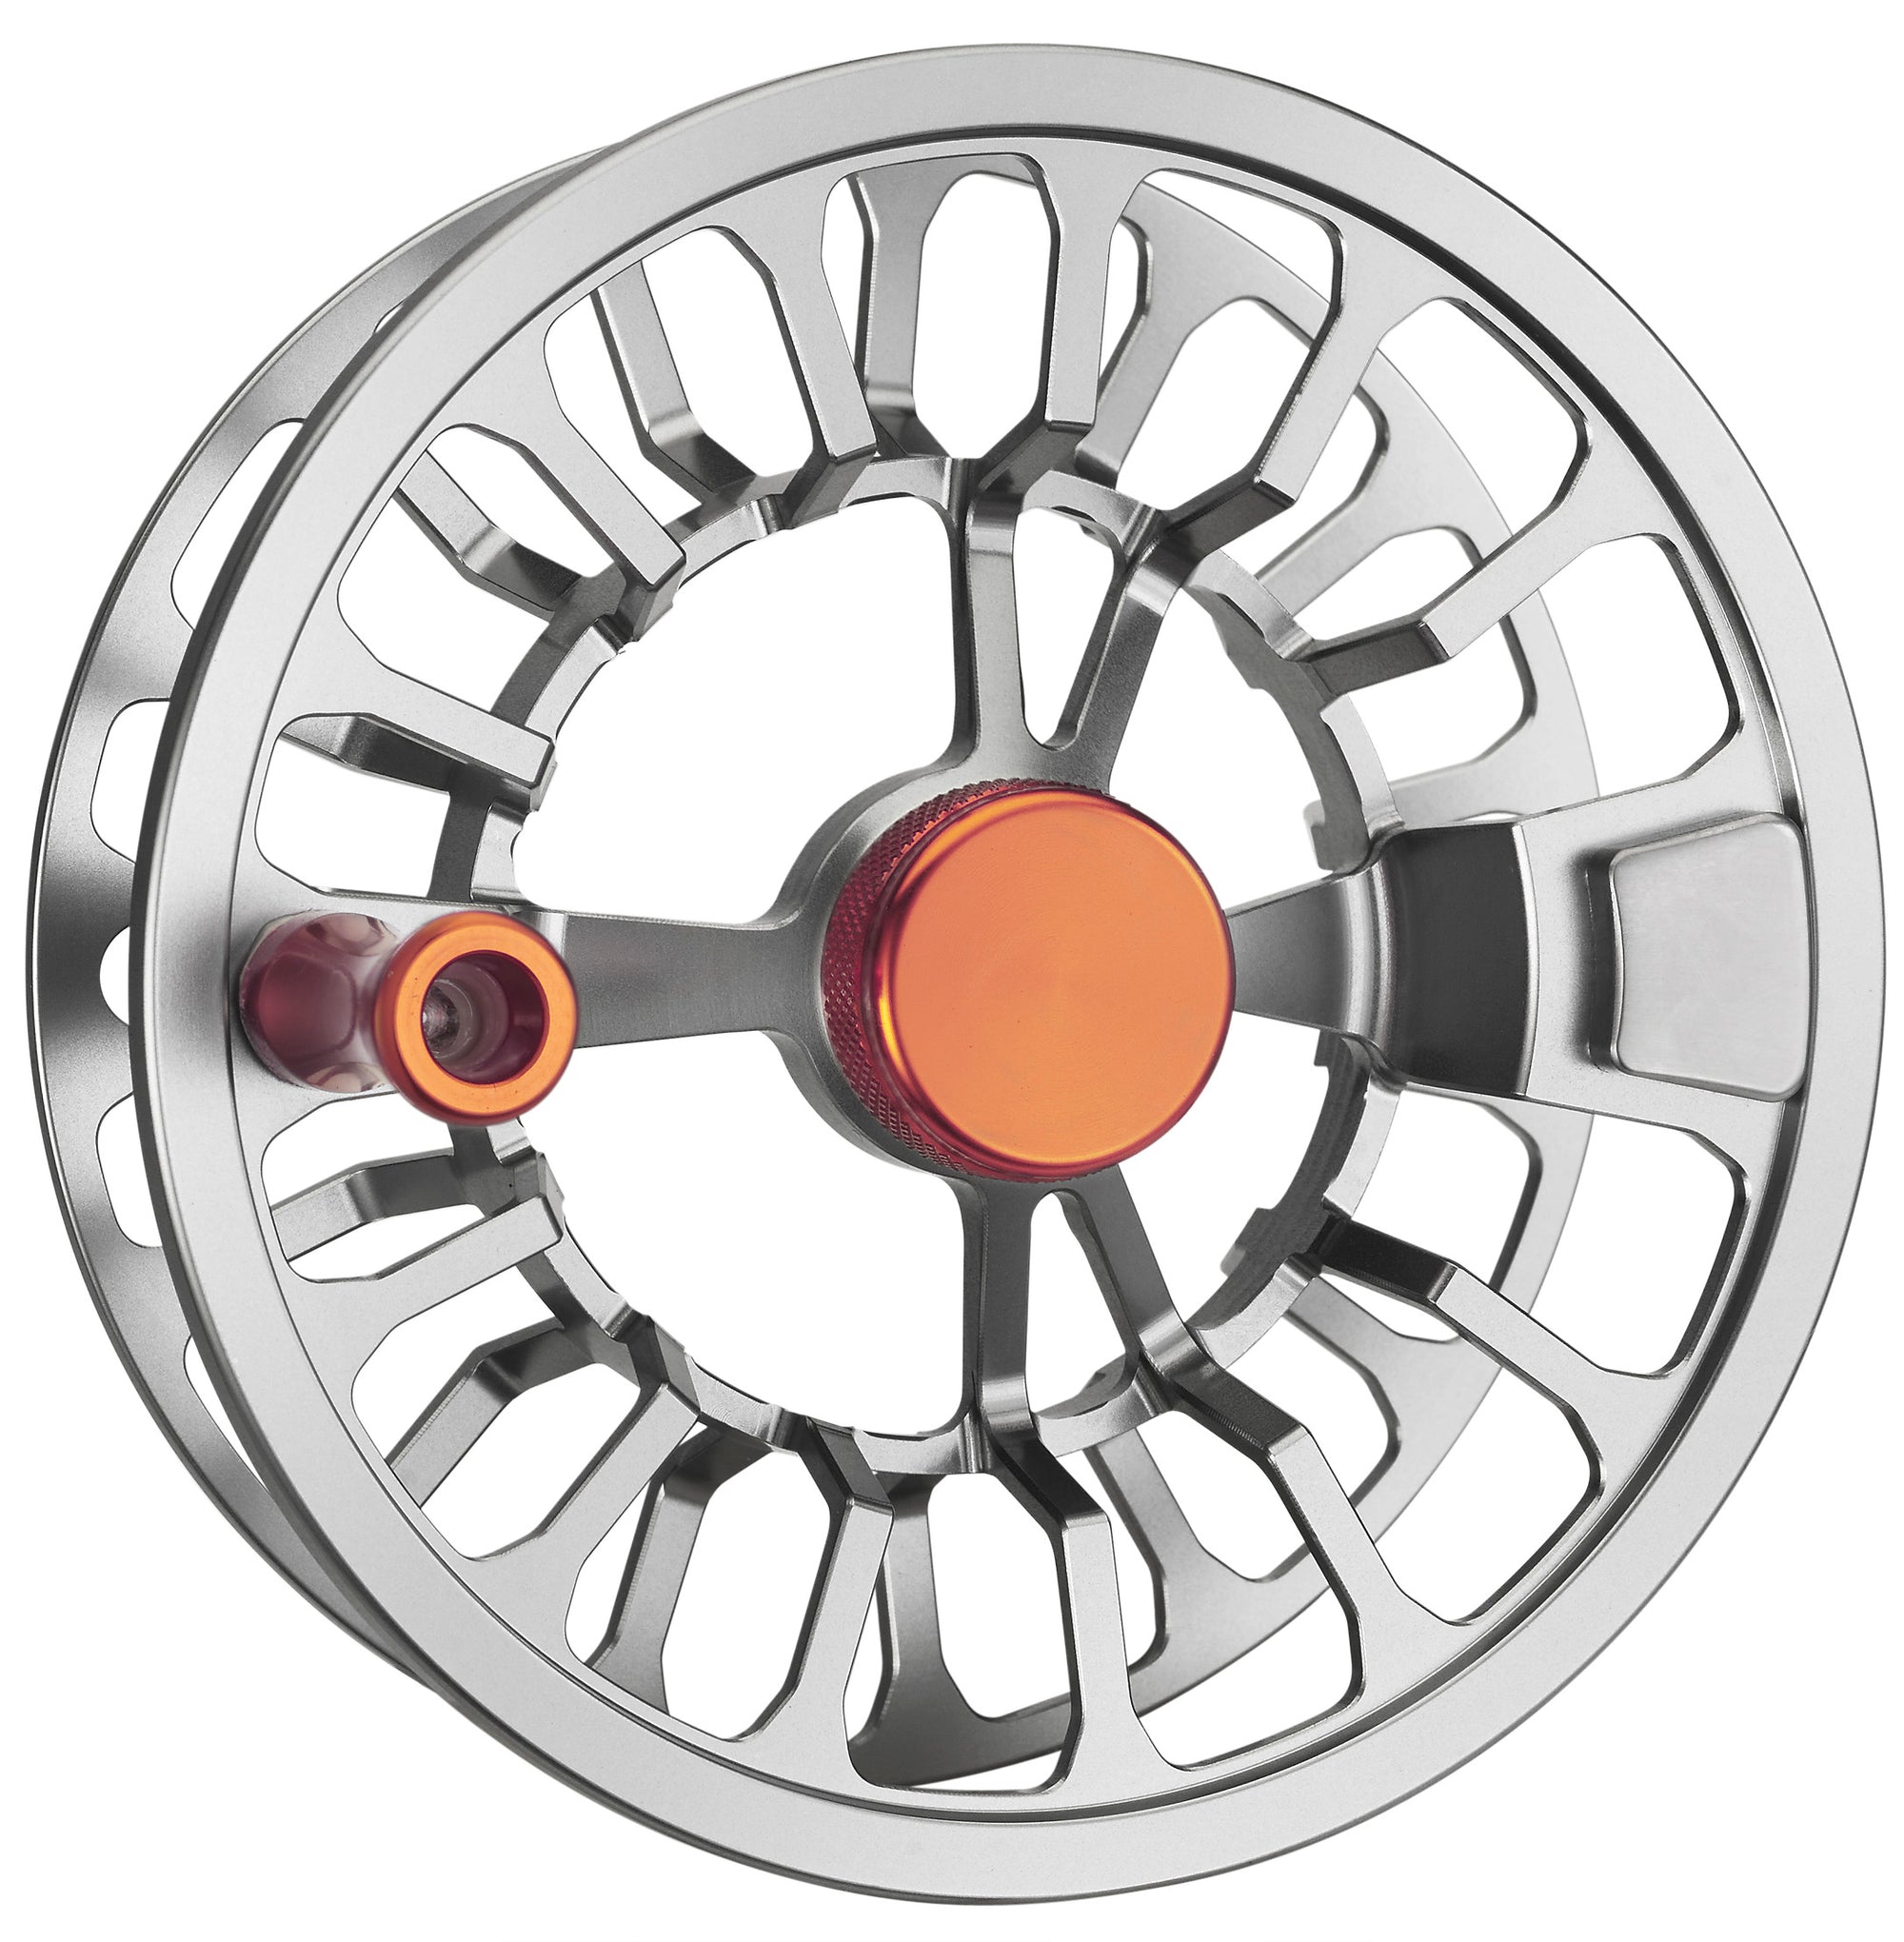 Cheeky Fishing - Fly Reels for Sale - AvidMax